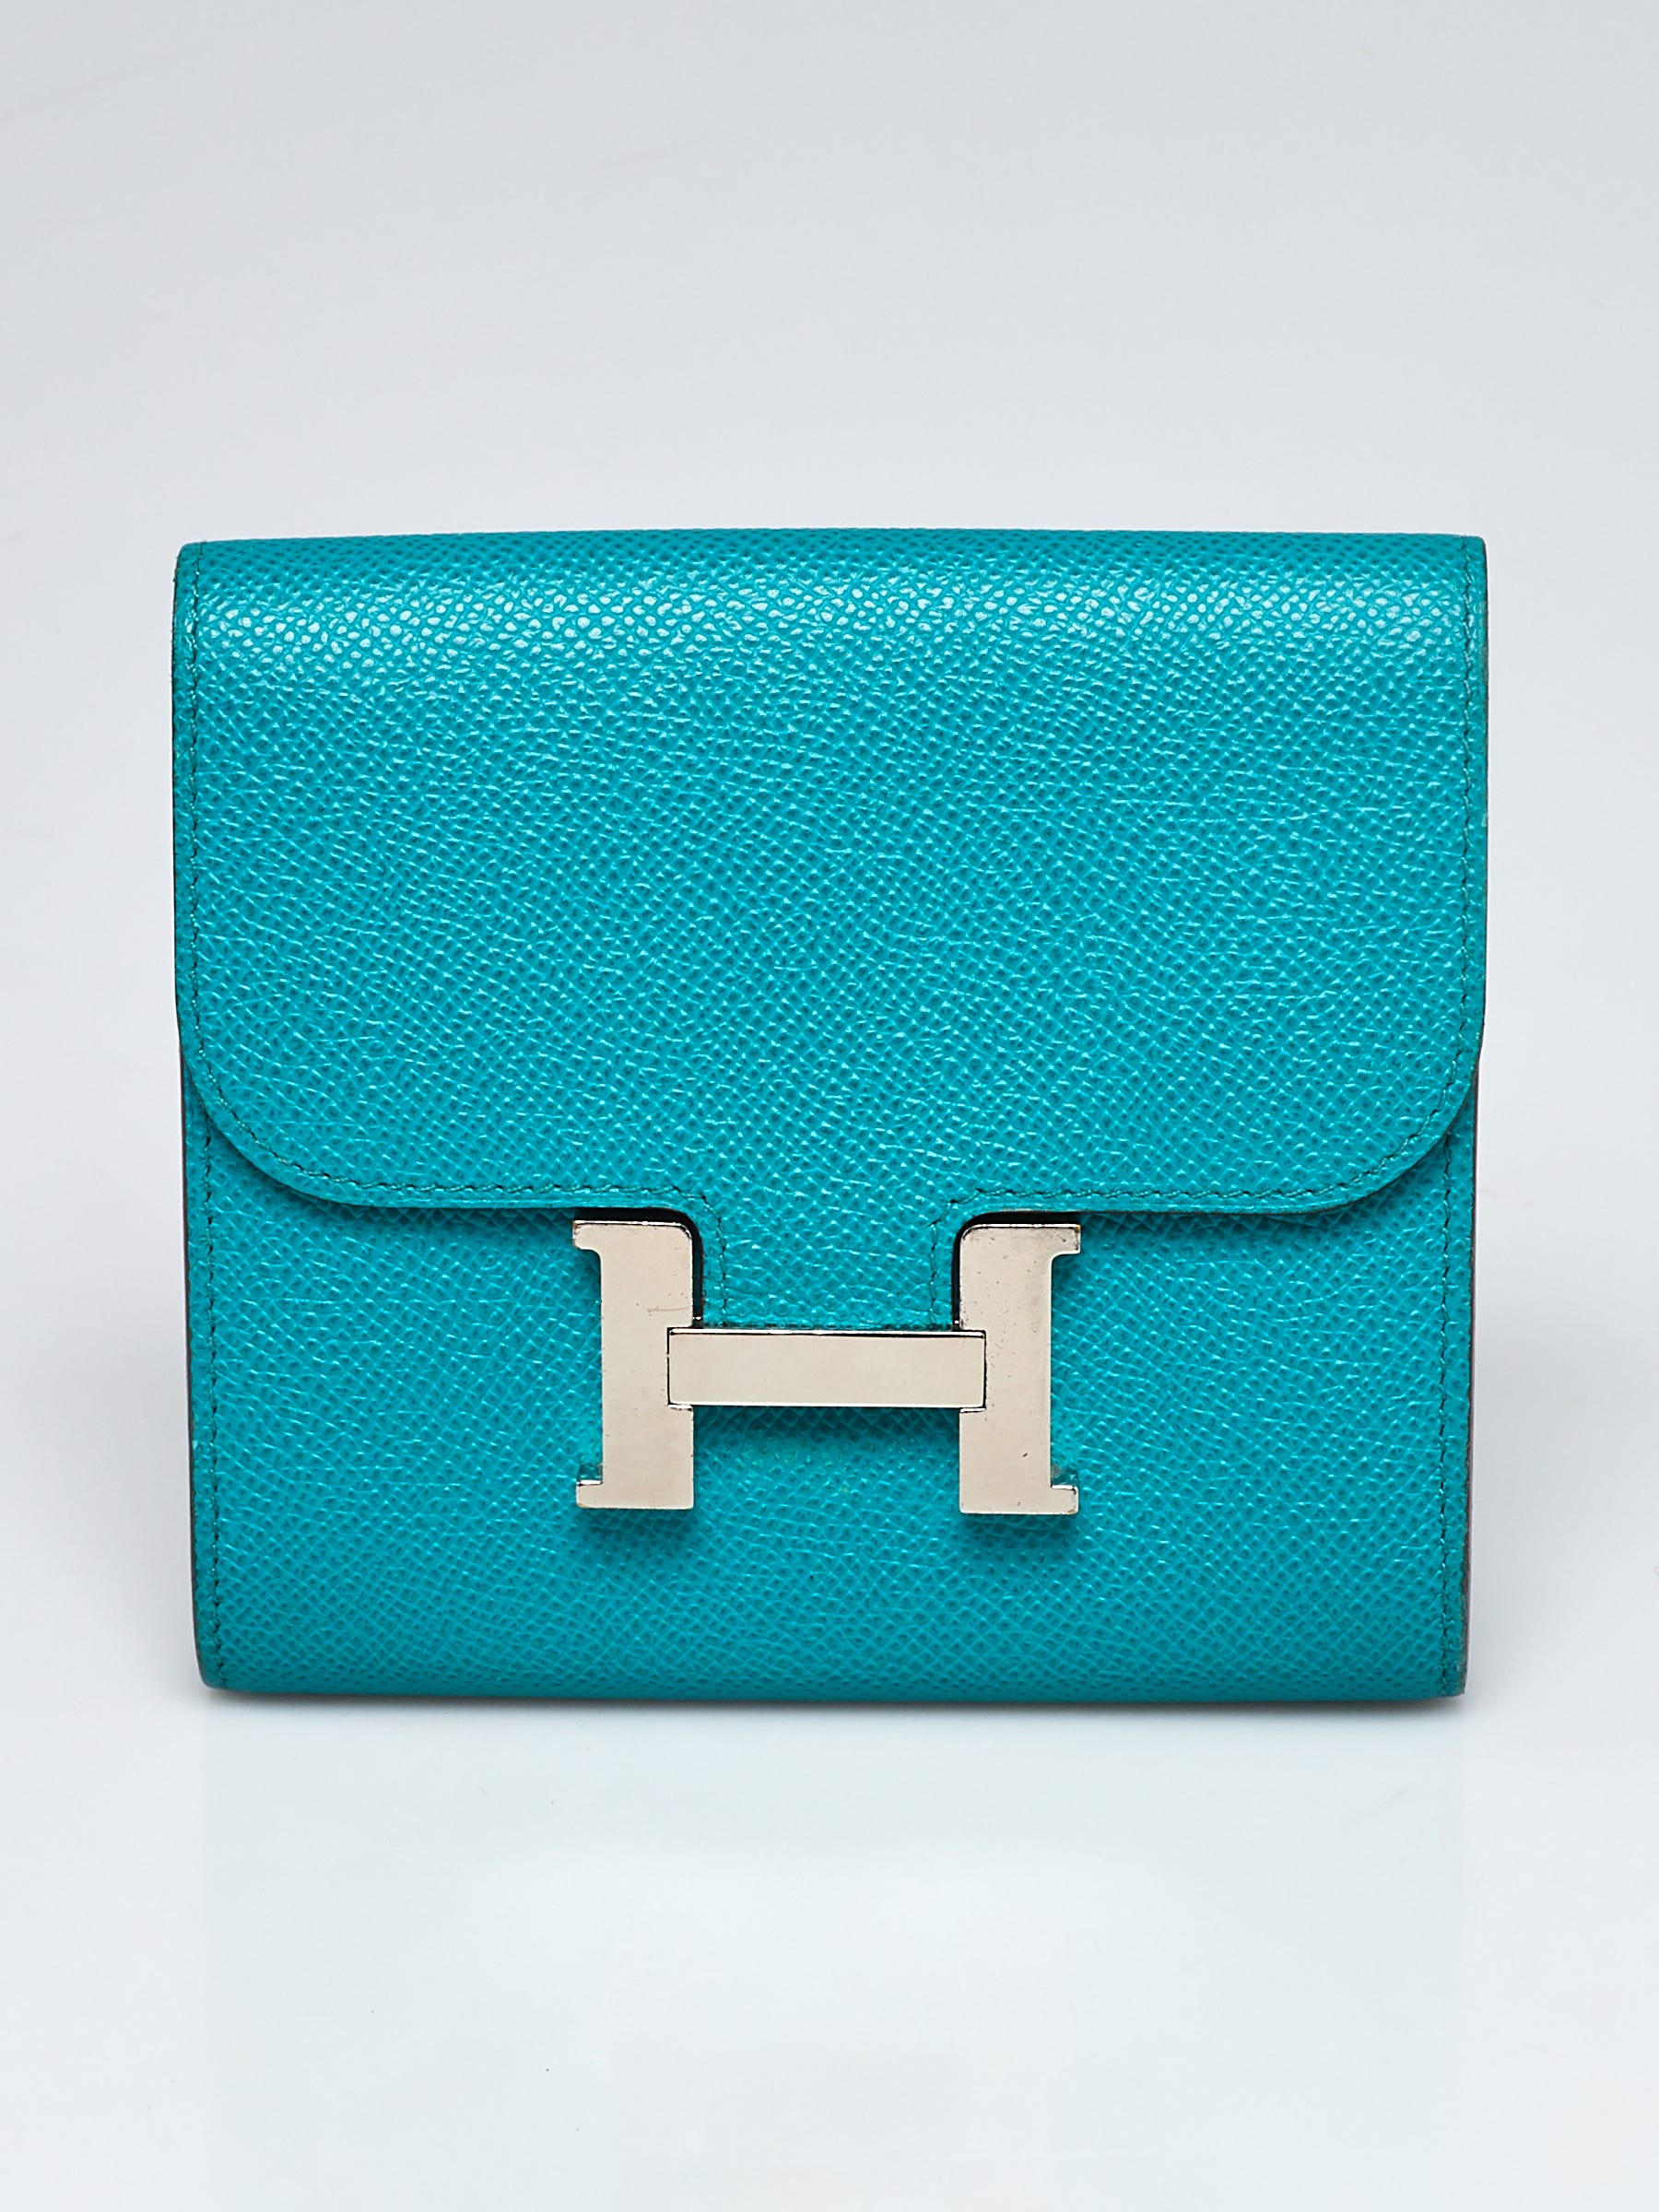 Hermès Bleu Paon Constance Long Wallet of Epsom Leather with Palladium  Hardware, Handbags and Accessories Online, 2019